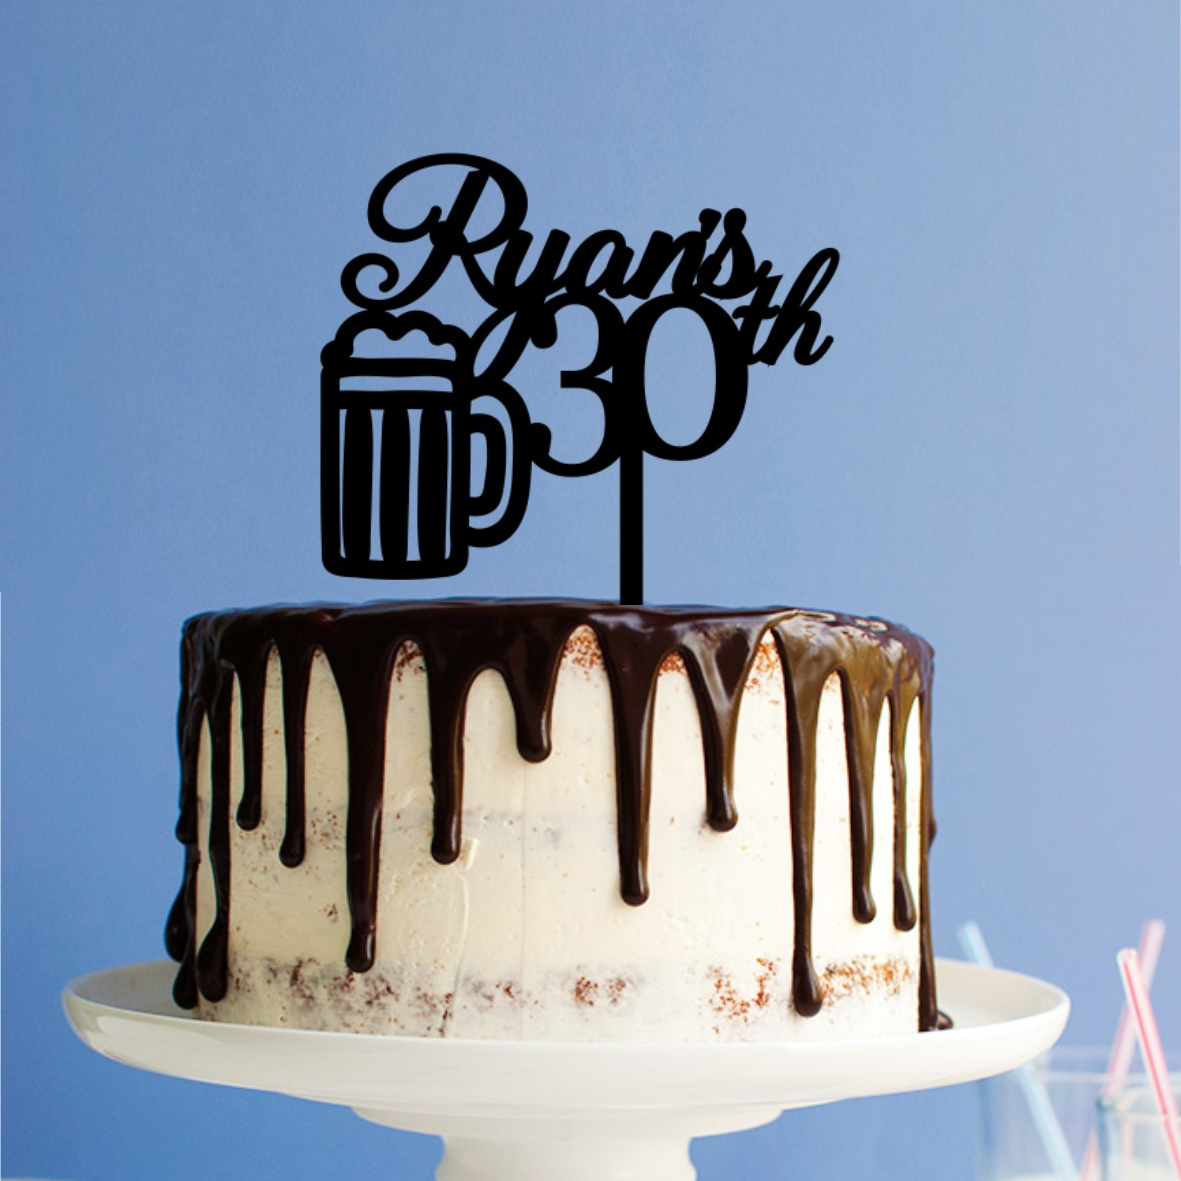 Quick Creations Cake Topper - Beer Ryan's 30